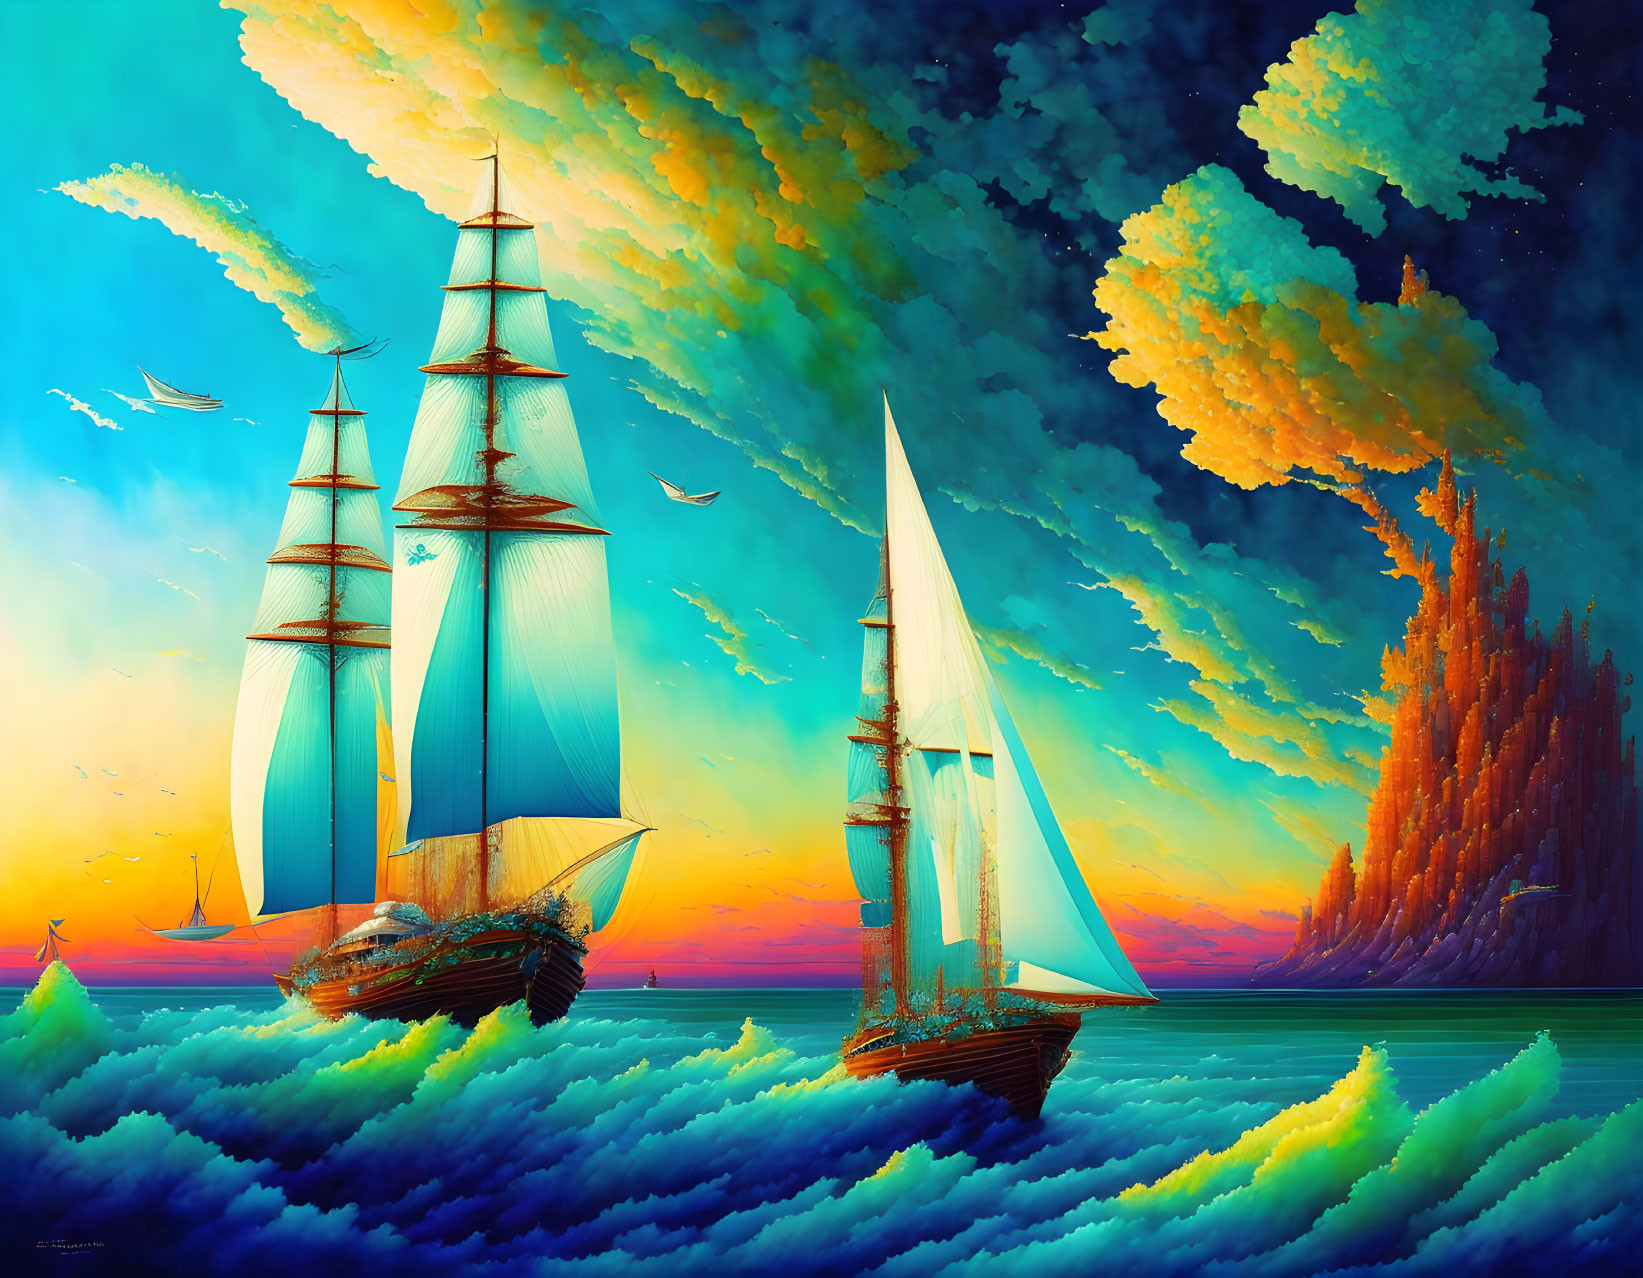 Vivid artwork: two sailing ships on turquoise waves under dramatic sky with orange and blue clouds and distant